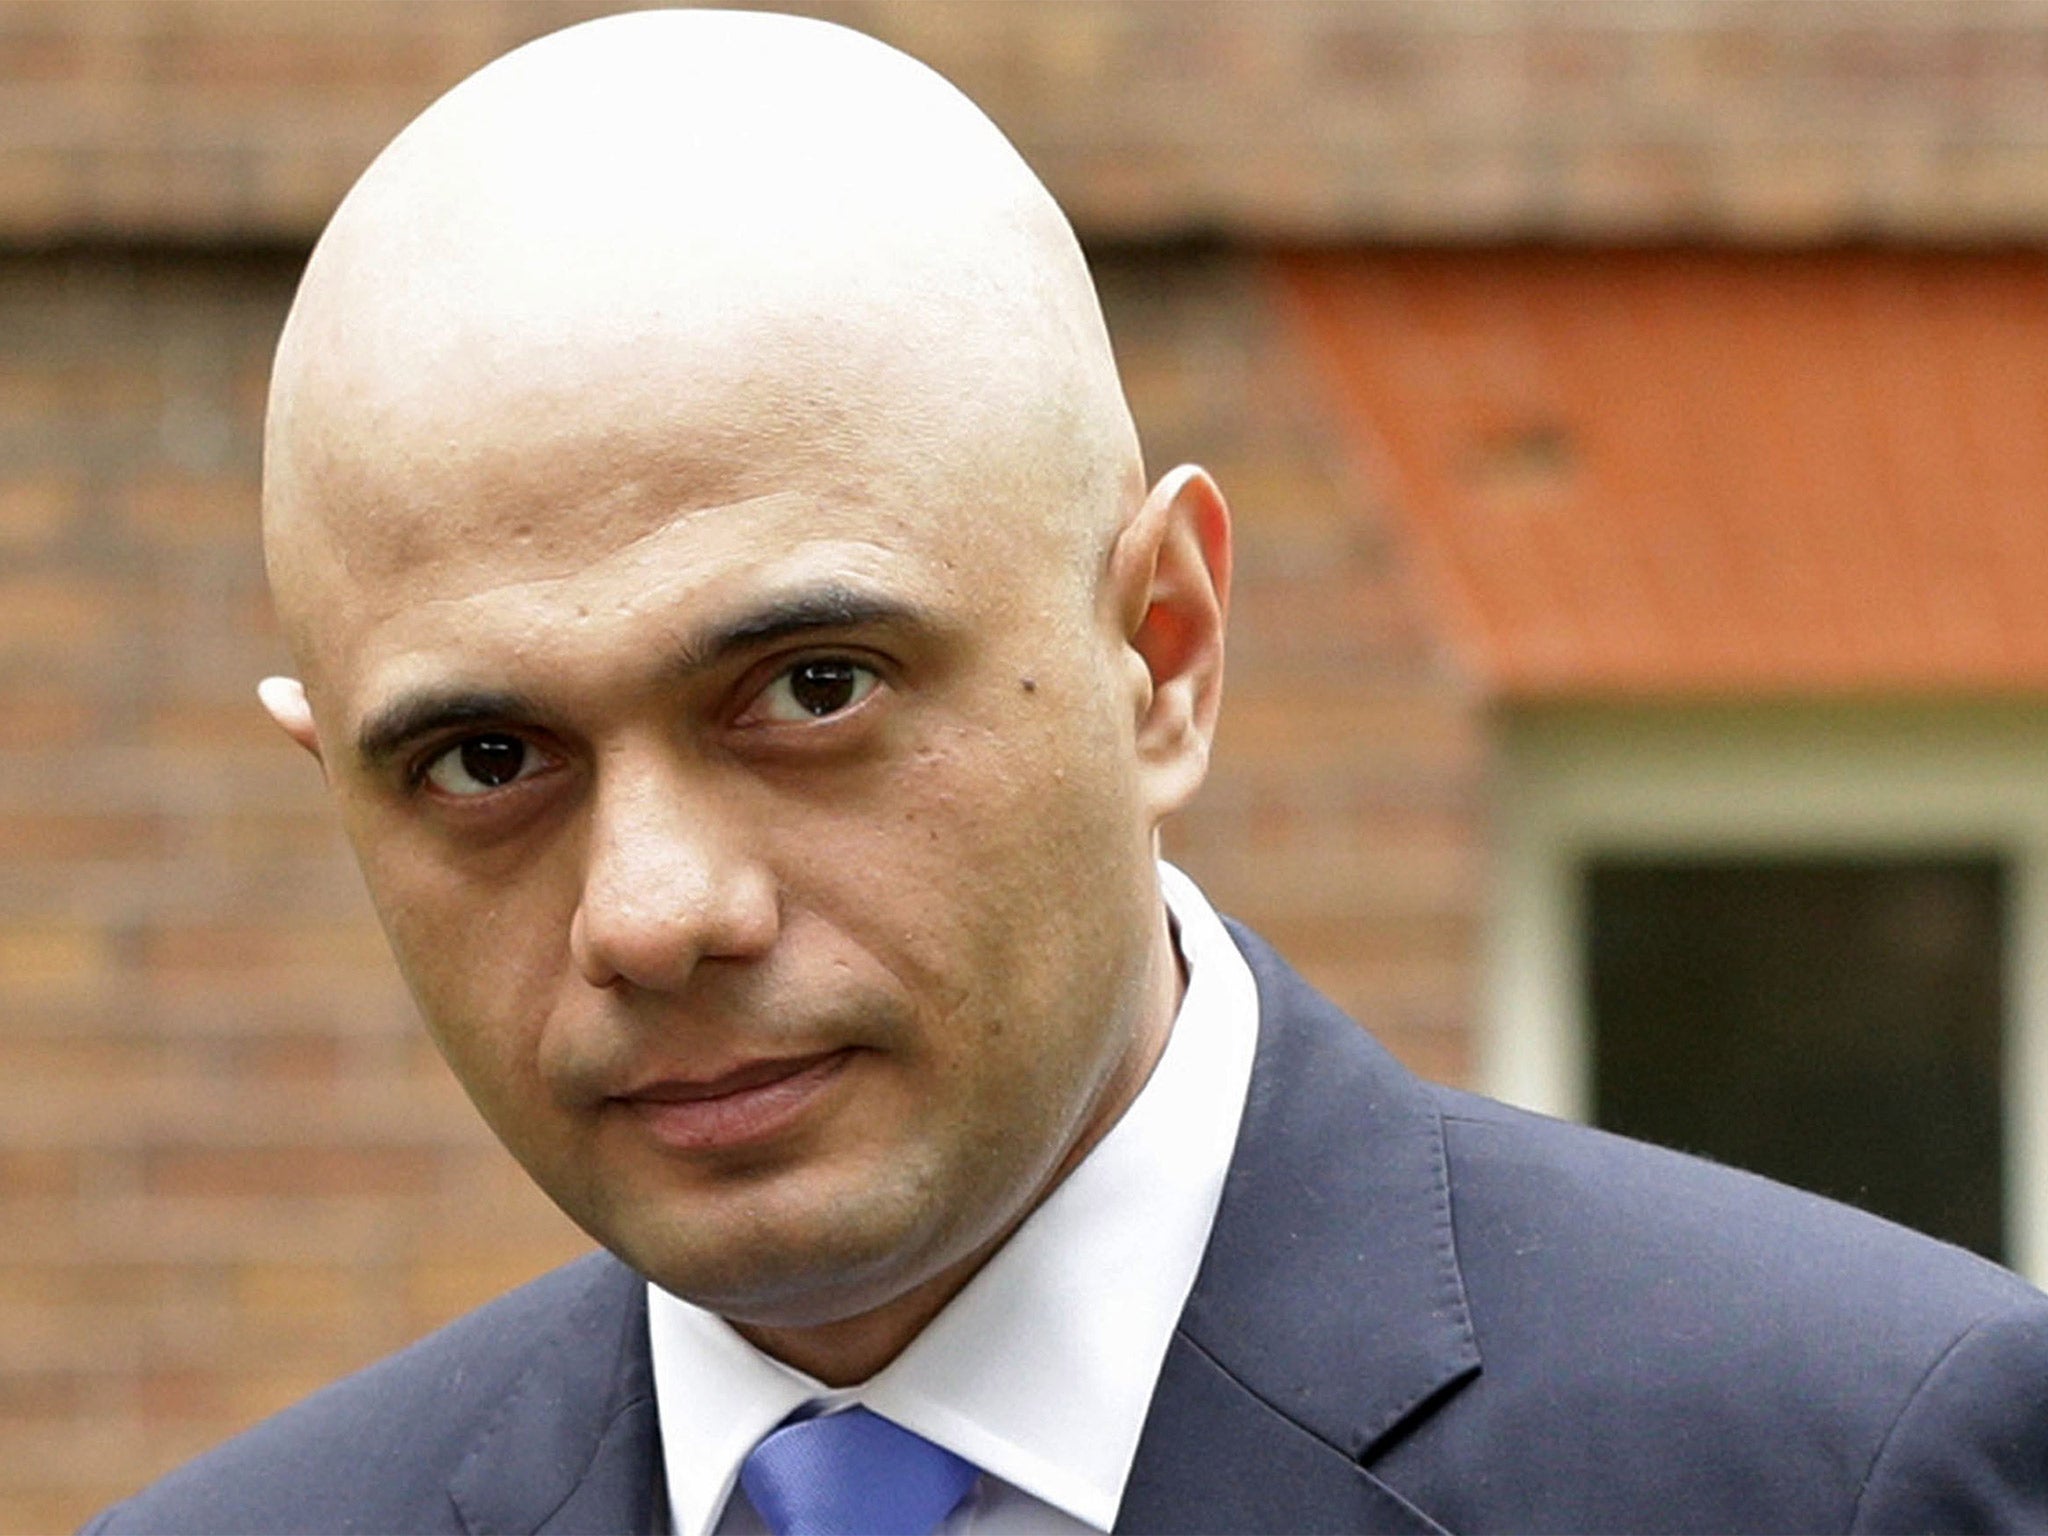 Sajid Javid appears to have been tipped to succeed David Cameron by the Prime Minister himself